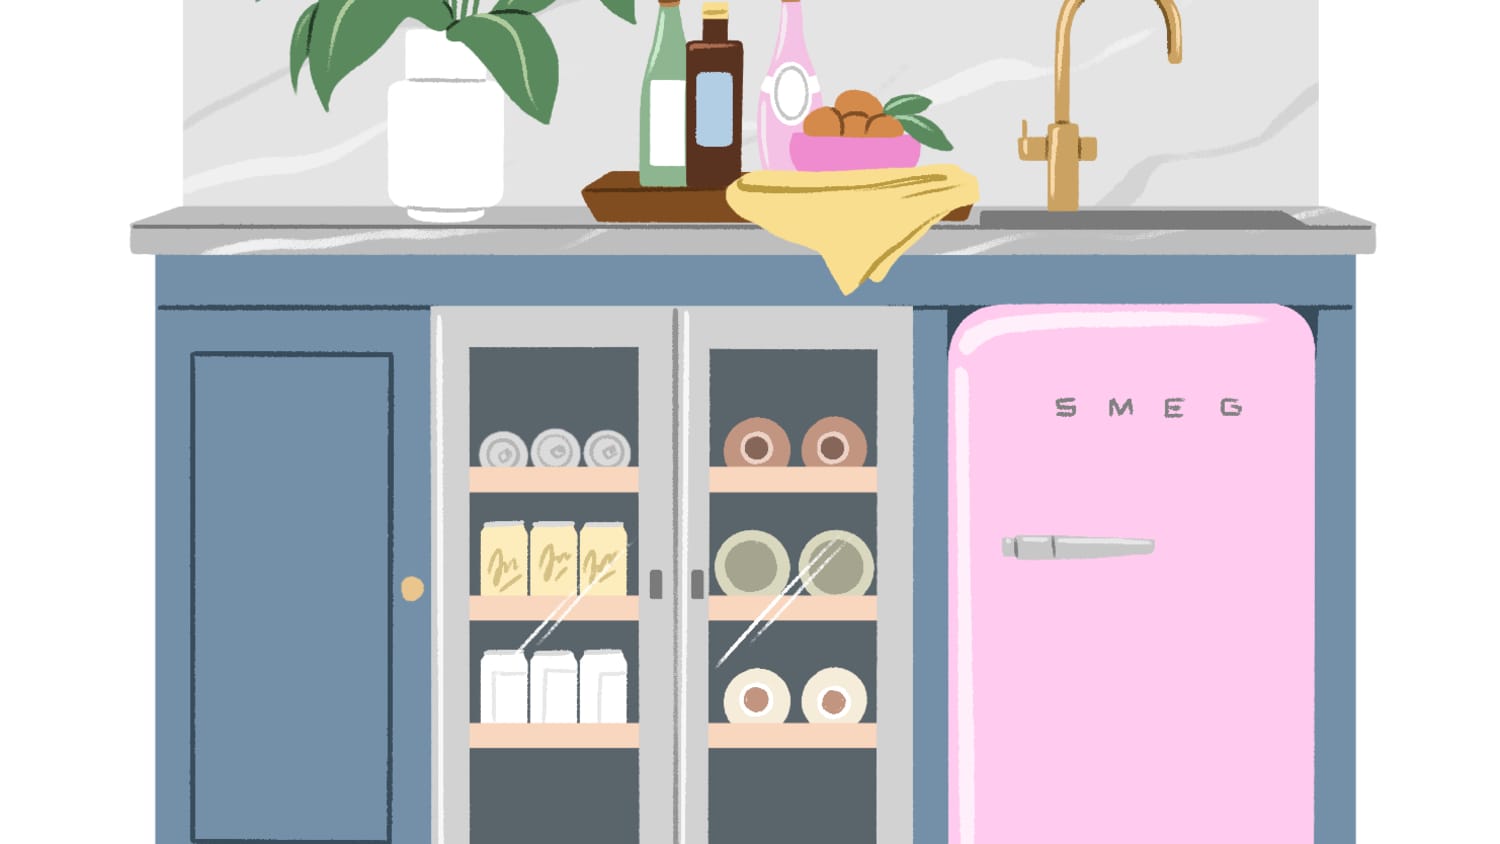 28 Pastel-Colored Kitchen Products Guaranteed To Make Your Heart Swoon